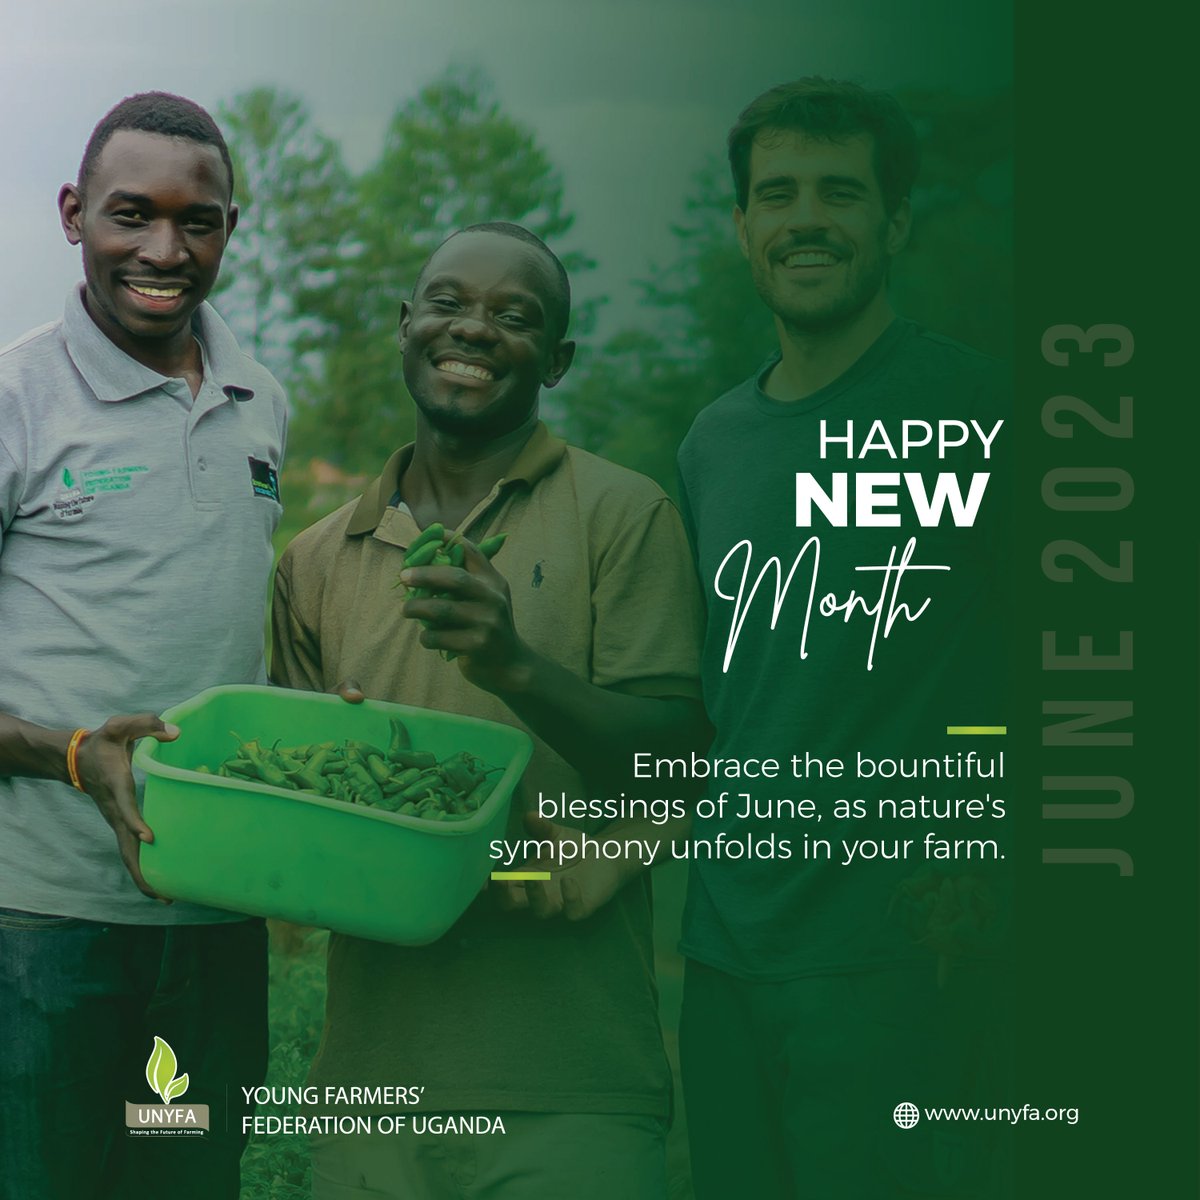 Happy new month to all farmers!
Let us sow seeds of dedication, cultivate unity, and harvest the rewards of our collective effort. #youngfarmers #unyfa #IYFEP